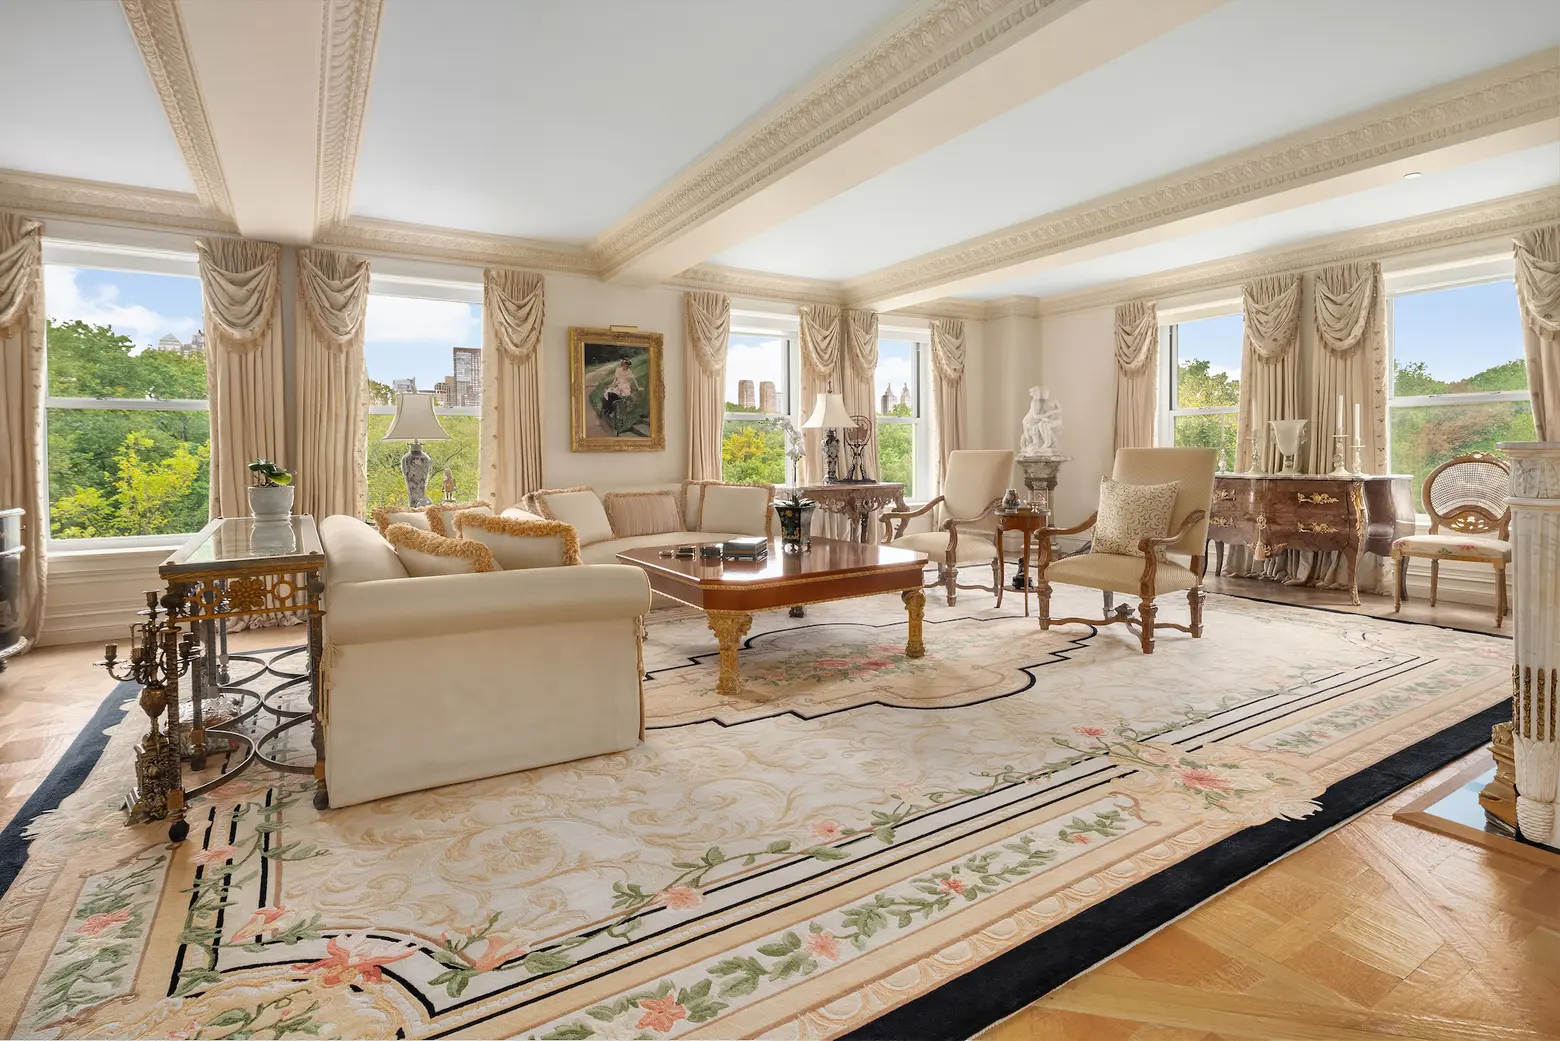 This $27M Fifth Avenue condo spans the entire 6th floor, with staff rooms and a separate studio